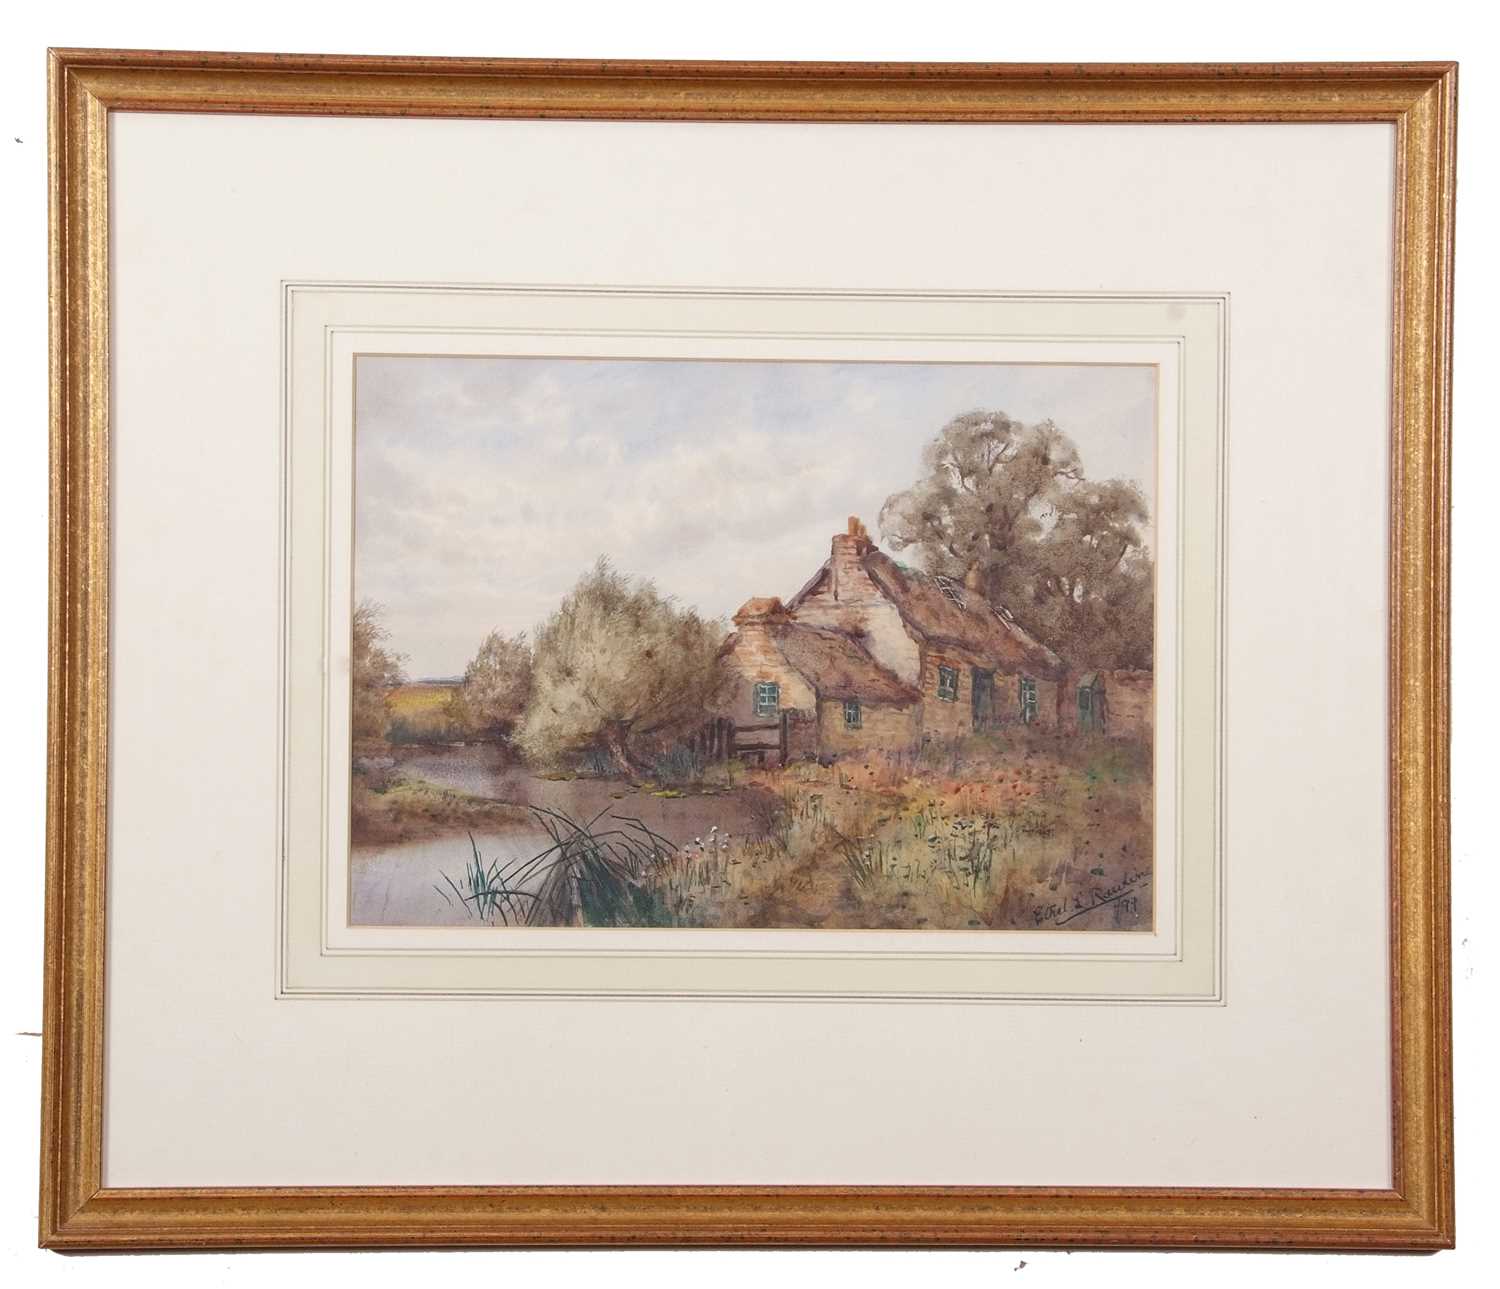 Ethel Rawlins (British, 1880-1940) A thatched cottage by a pond, watercolour, signed lower right and - Image 3 of 4